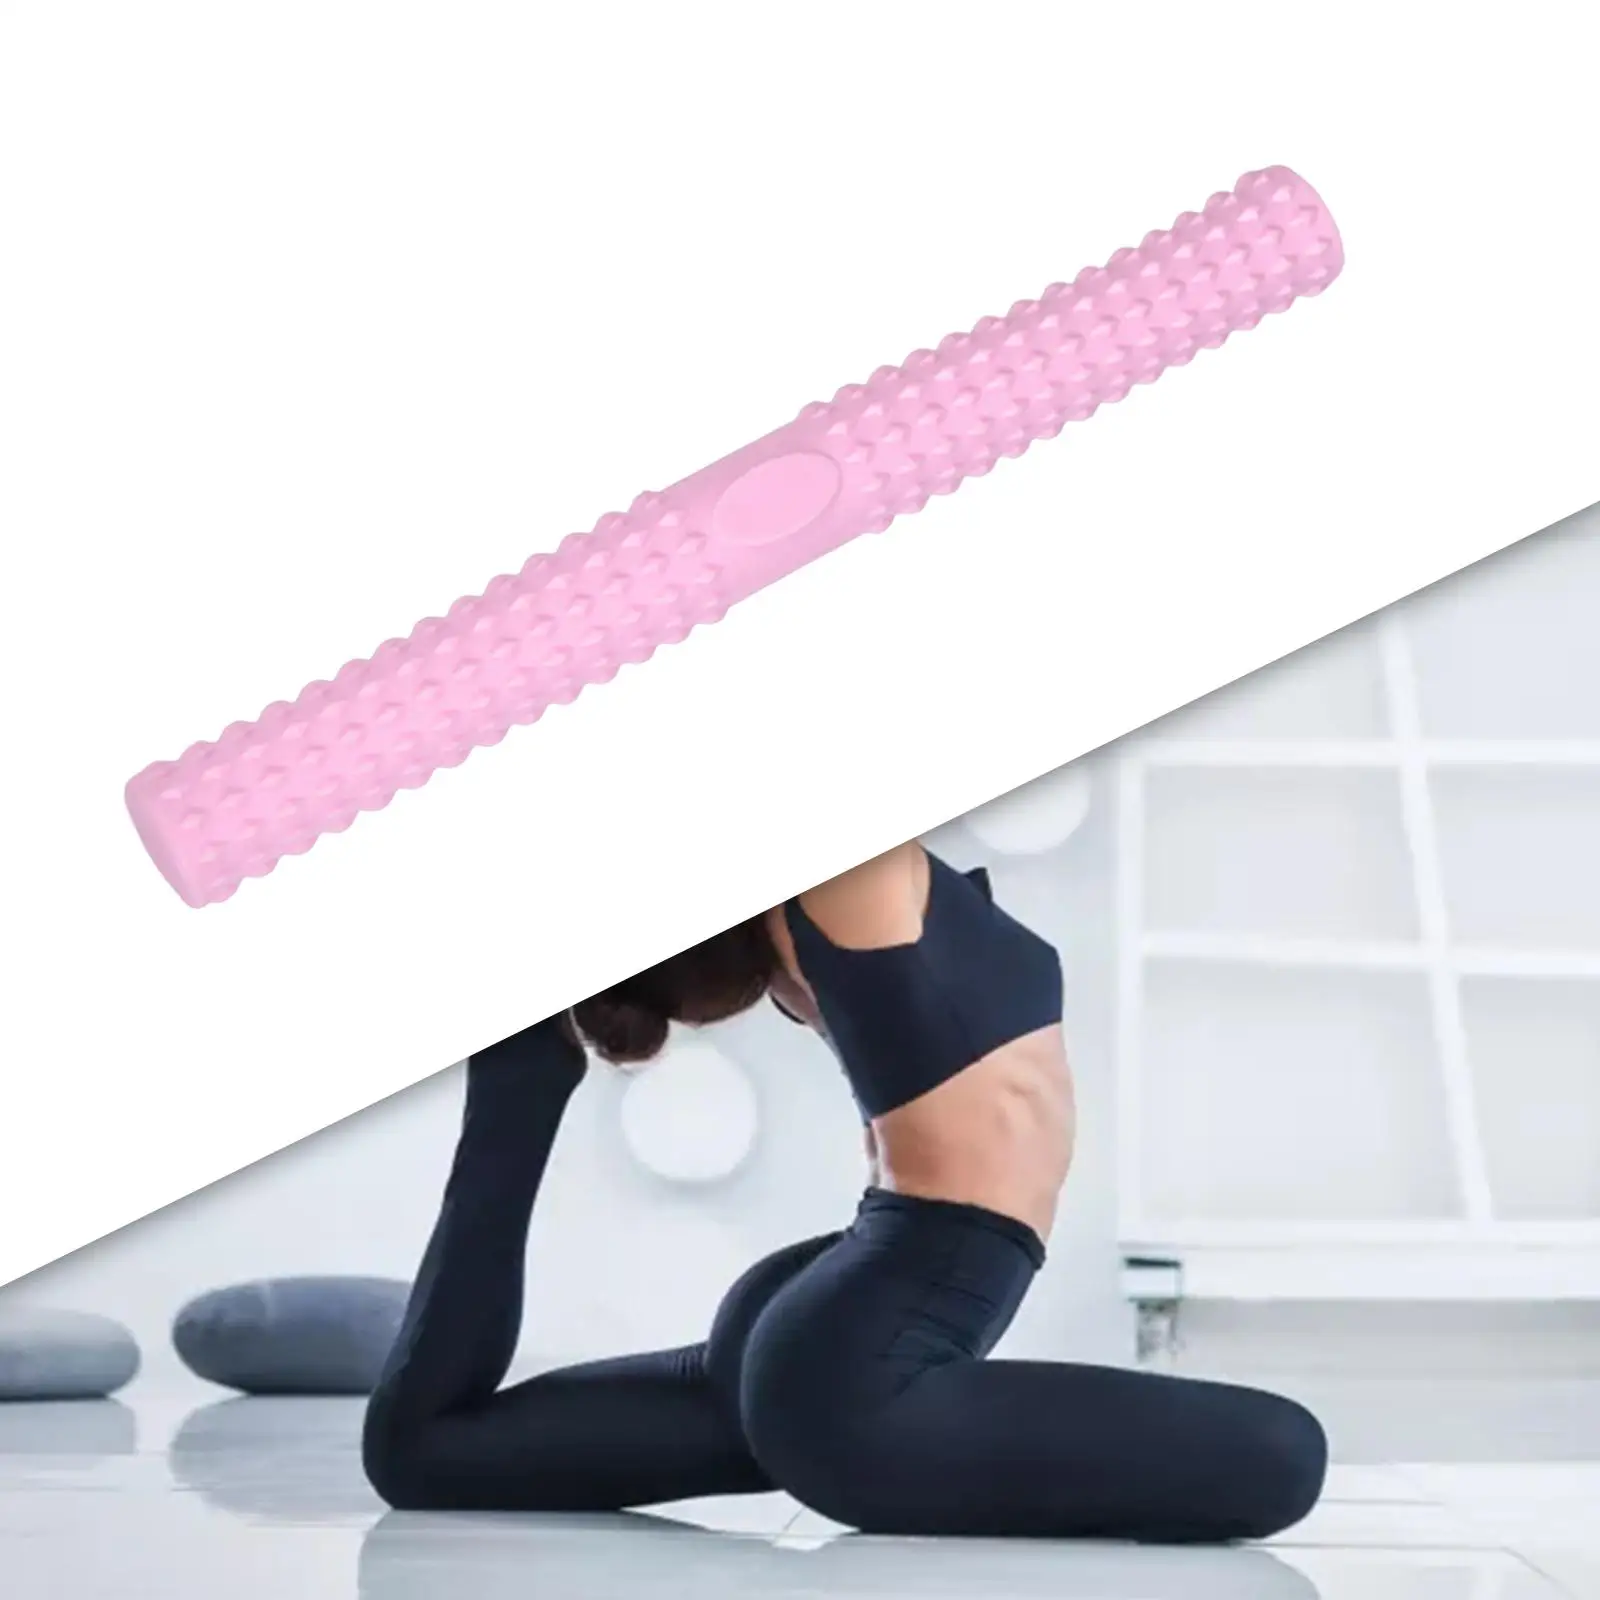 Twist Exerciser Bars Silicone Exercise Equipment Working Out Manual Fitness Massage Roller Stick for Legs Arms Neck Thigh Calf